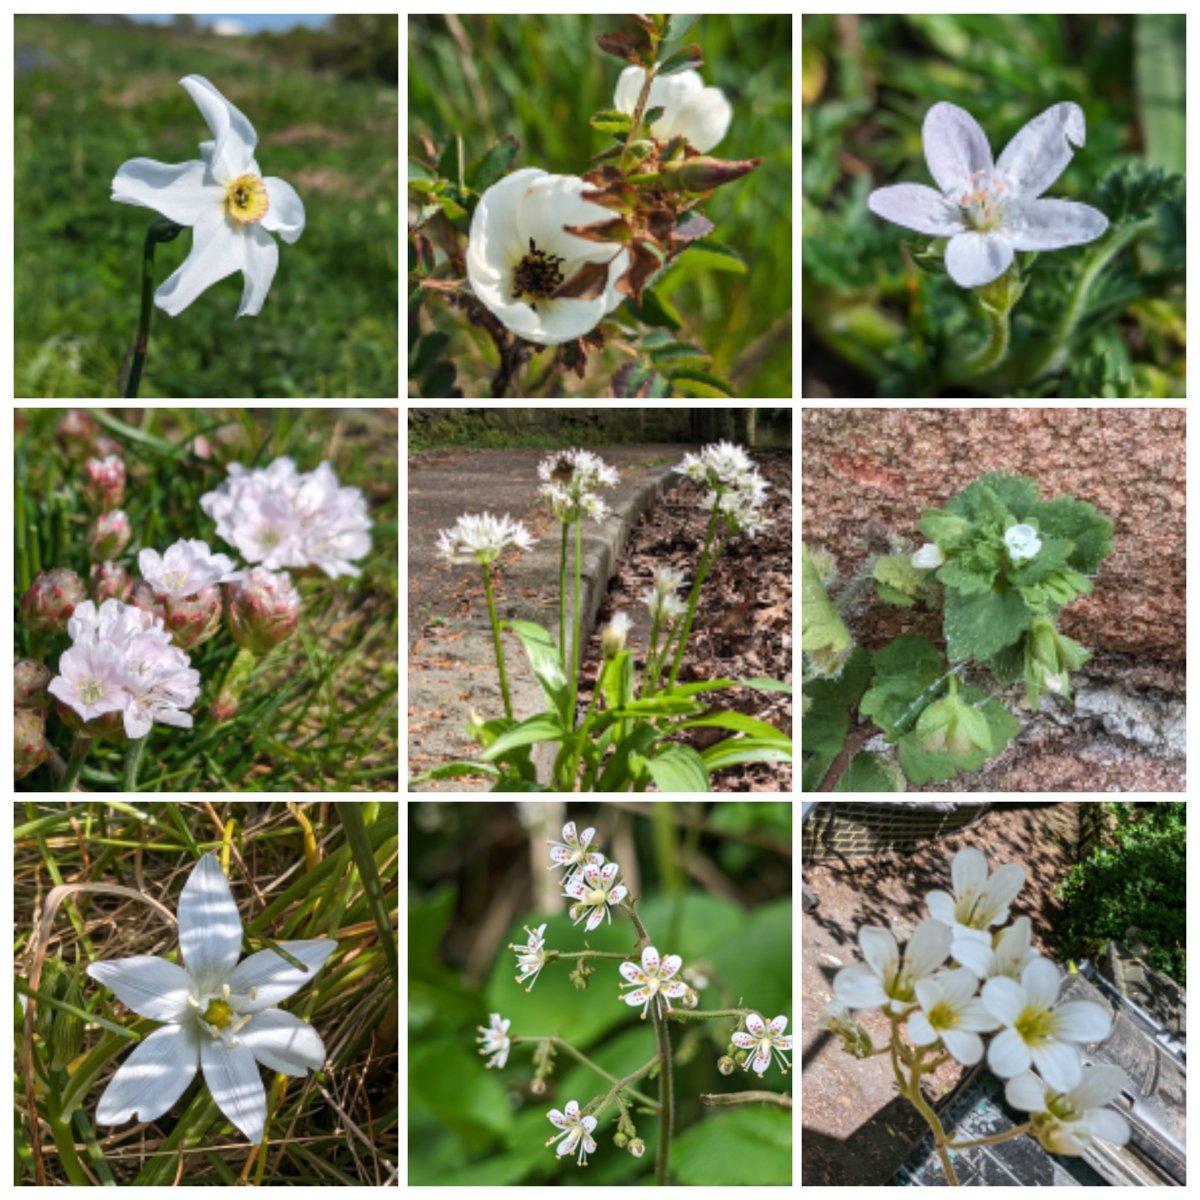 A distinctly pale theme to this week's #wildflowerhour montage... 📸 Poet's Daffodil, Burnet Rose, Common Stork's-bill, Thrift, Ramsons, Green Field-speedwell, Star-of-Bethlehem, Kidney Saxifrage & Meadow Saxifrage.